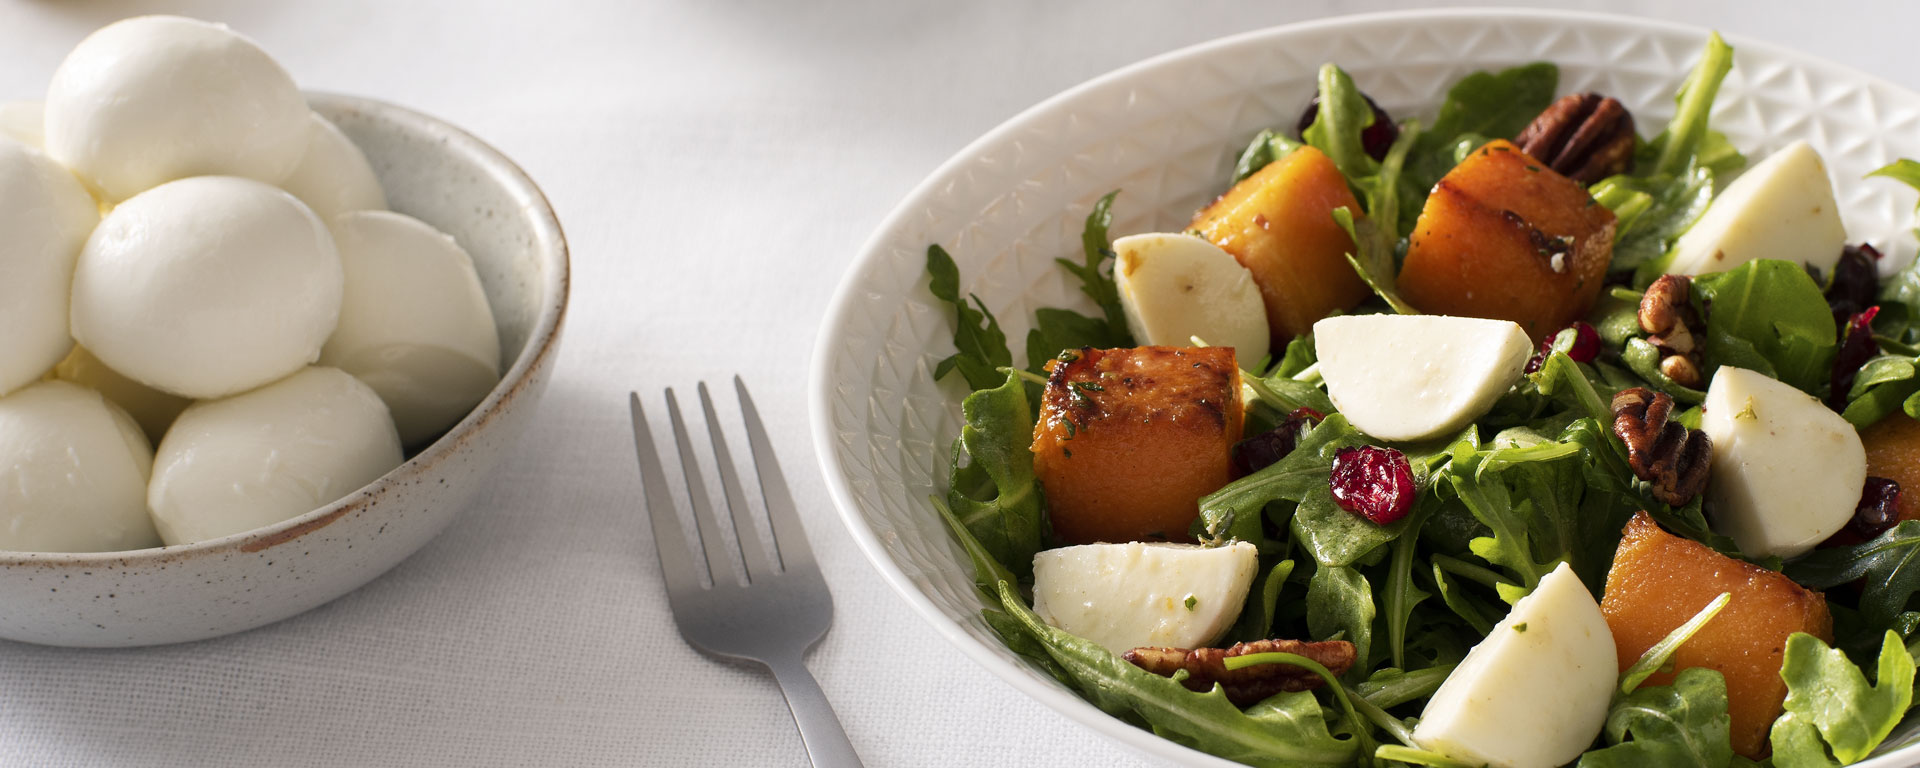 Photo of - Butternut Squash and Bocconcini Salad